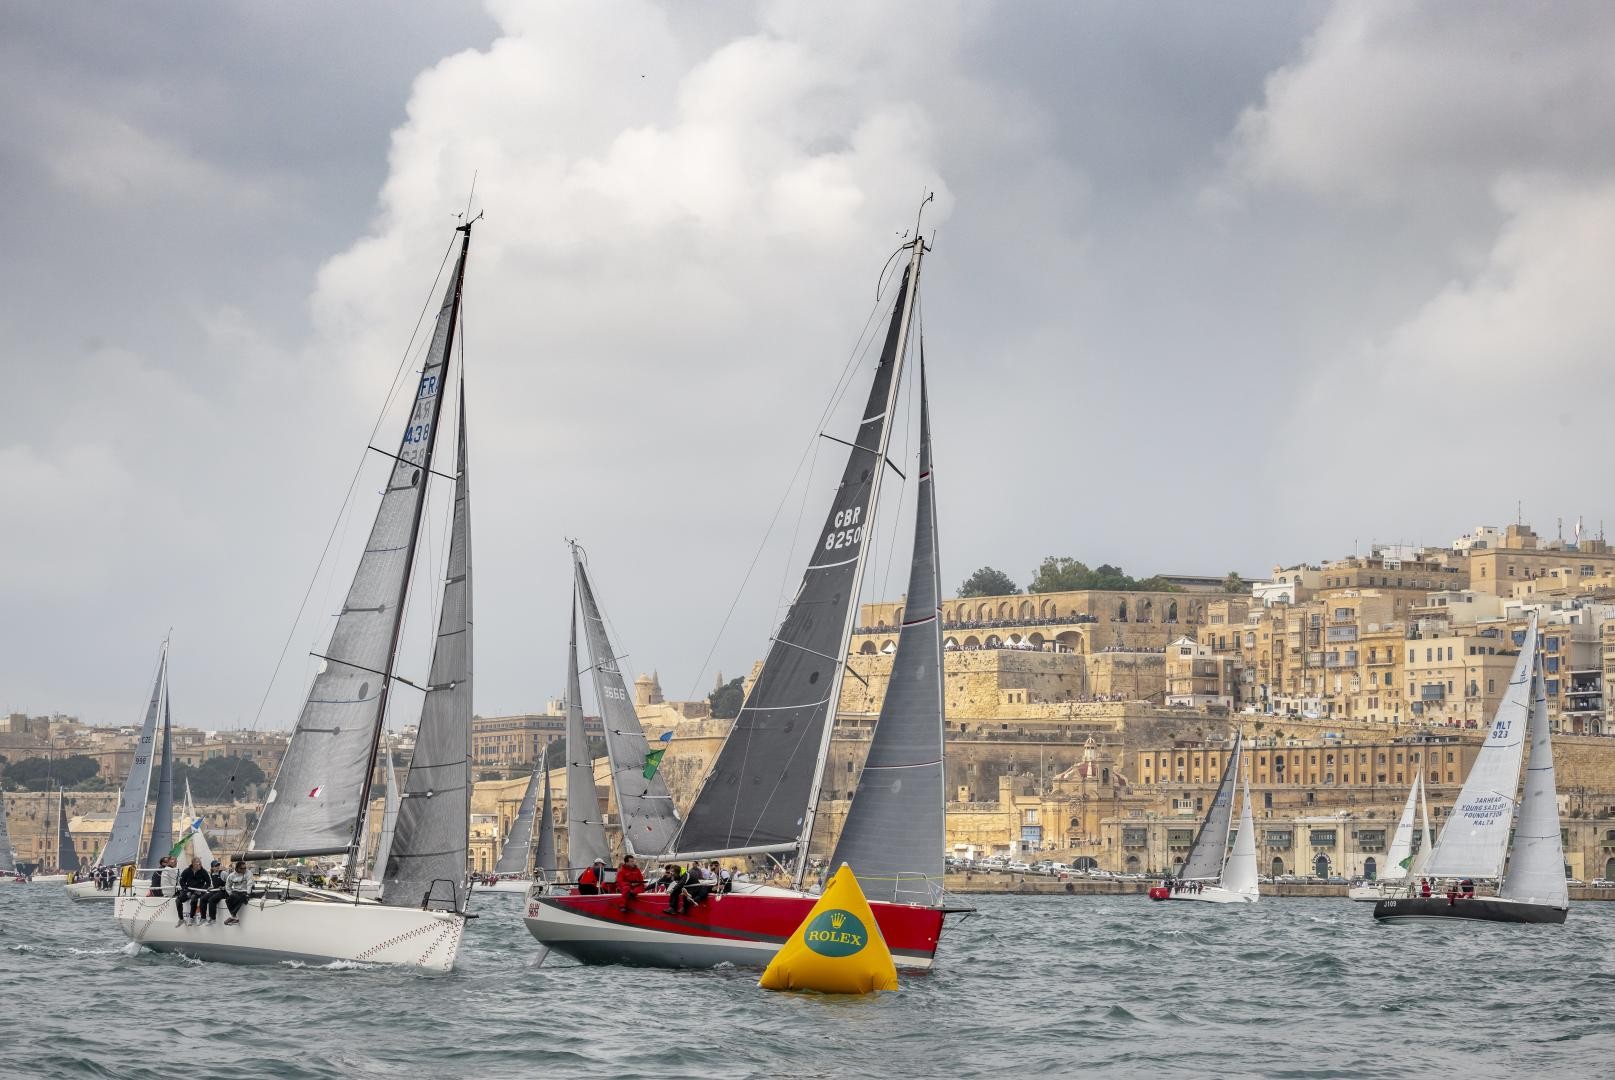 Solenn (L) at the start of the 2018 Rolex Middle Sea Race